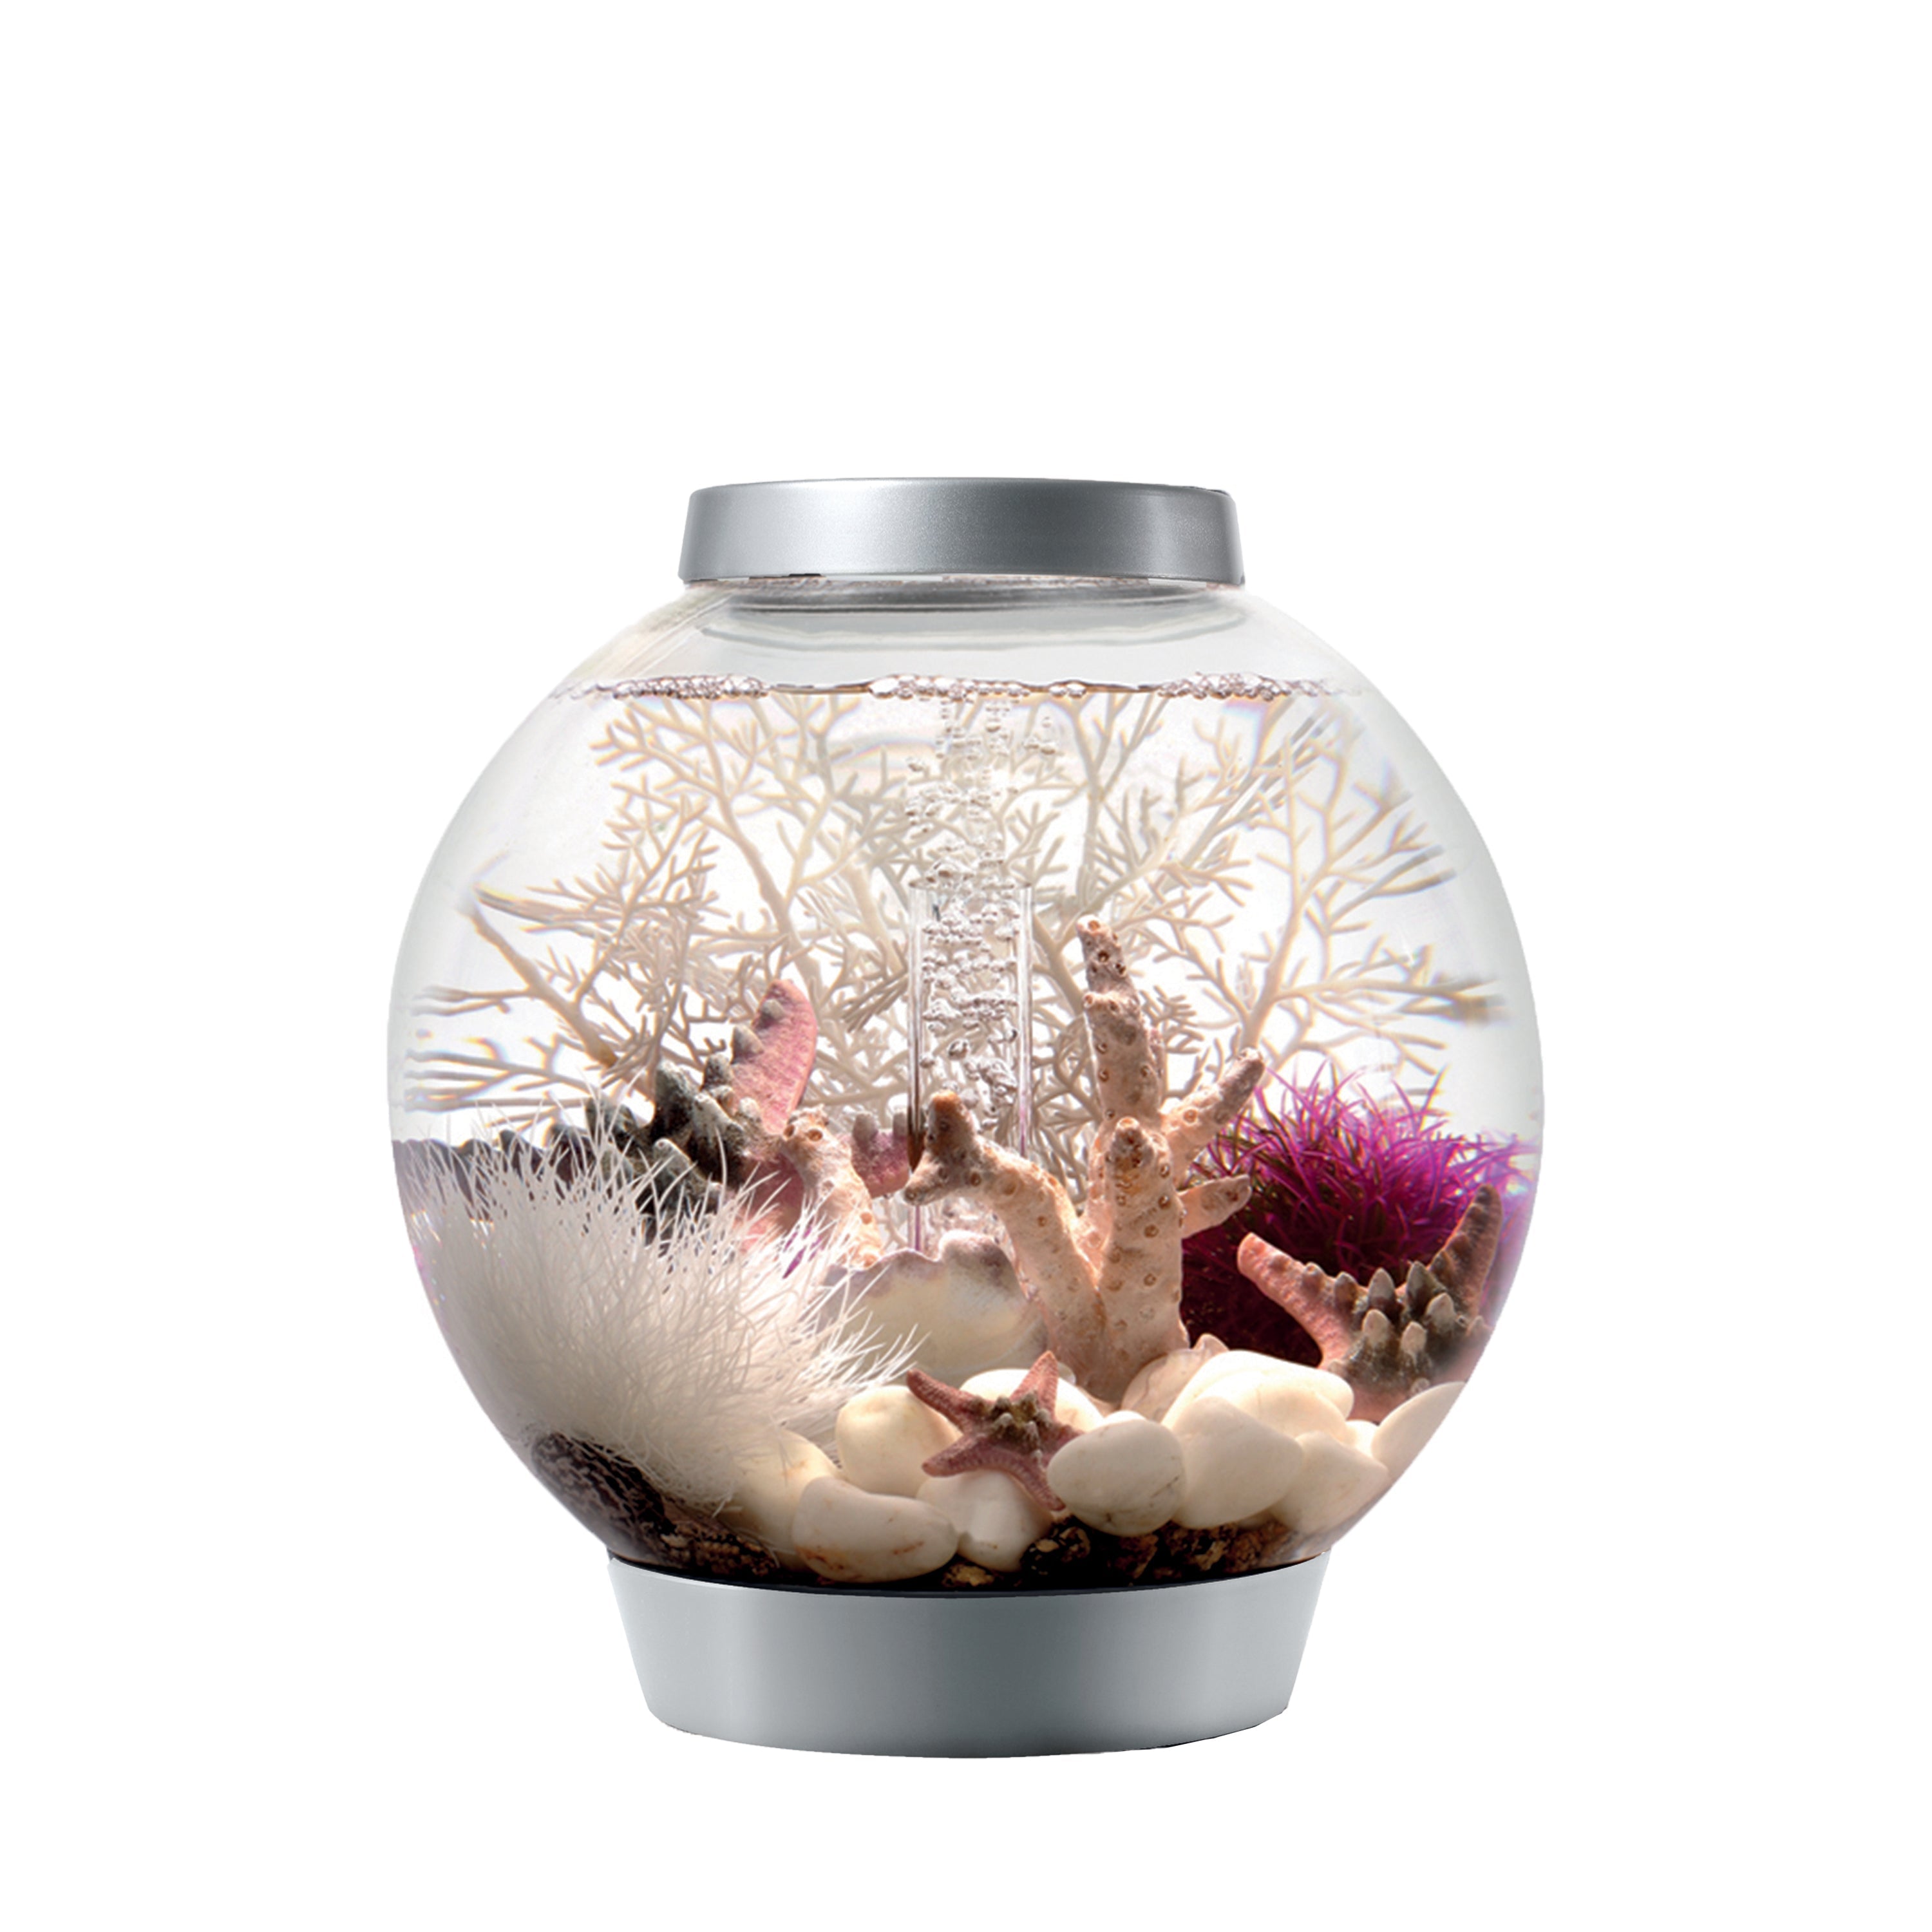 CLASSIC 15 Aquarium with Standard Light - 4 gallon available in Silver